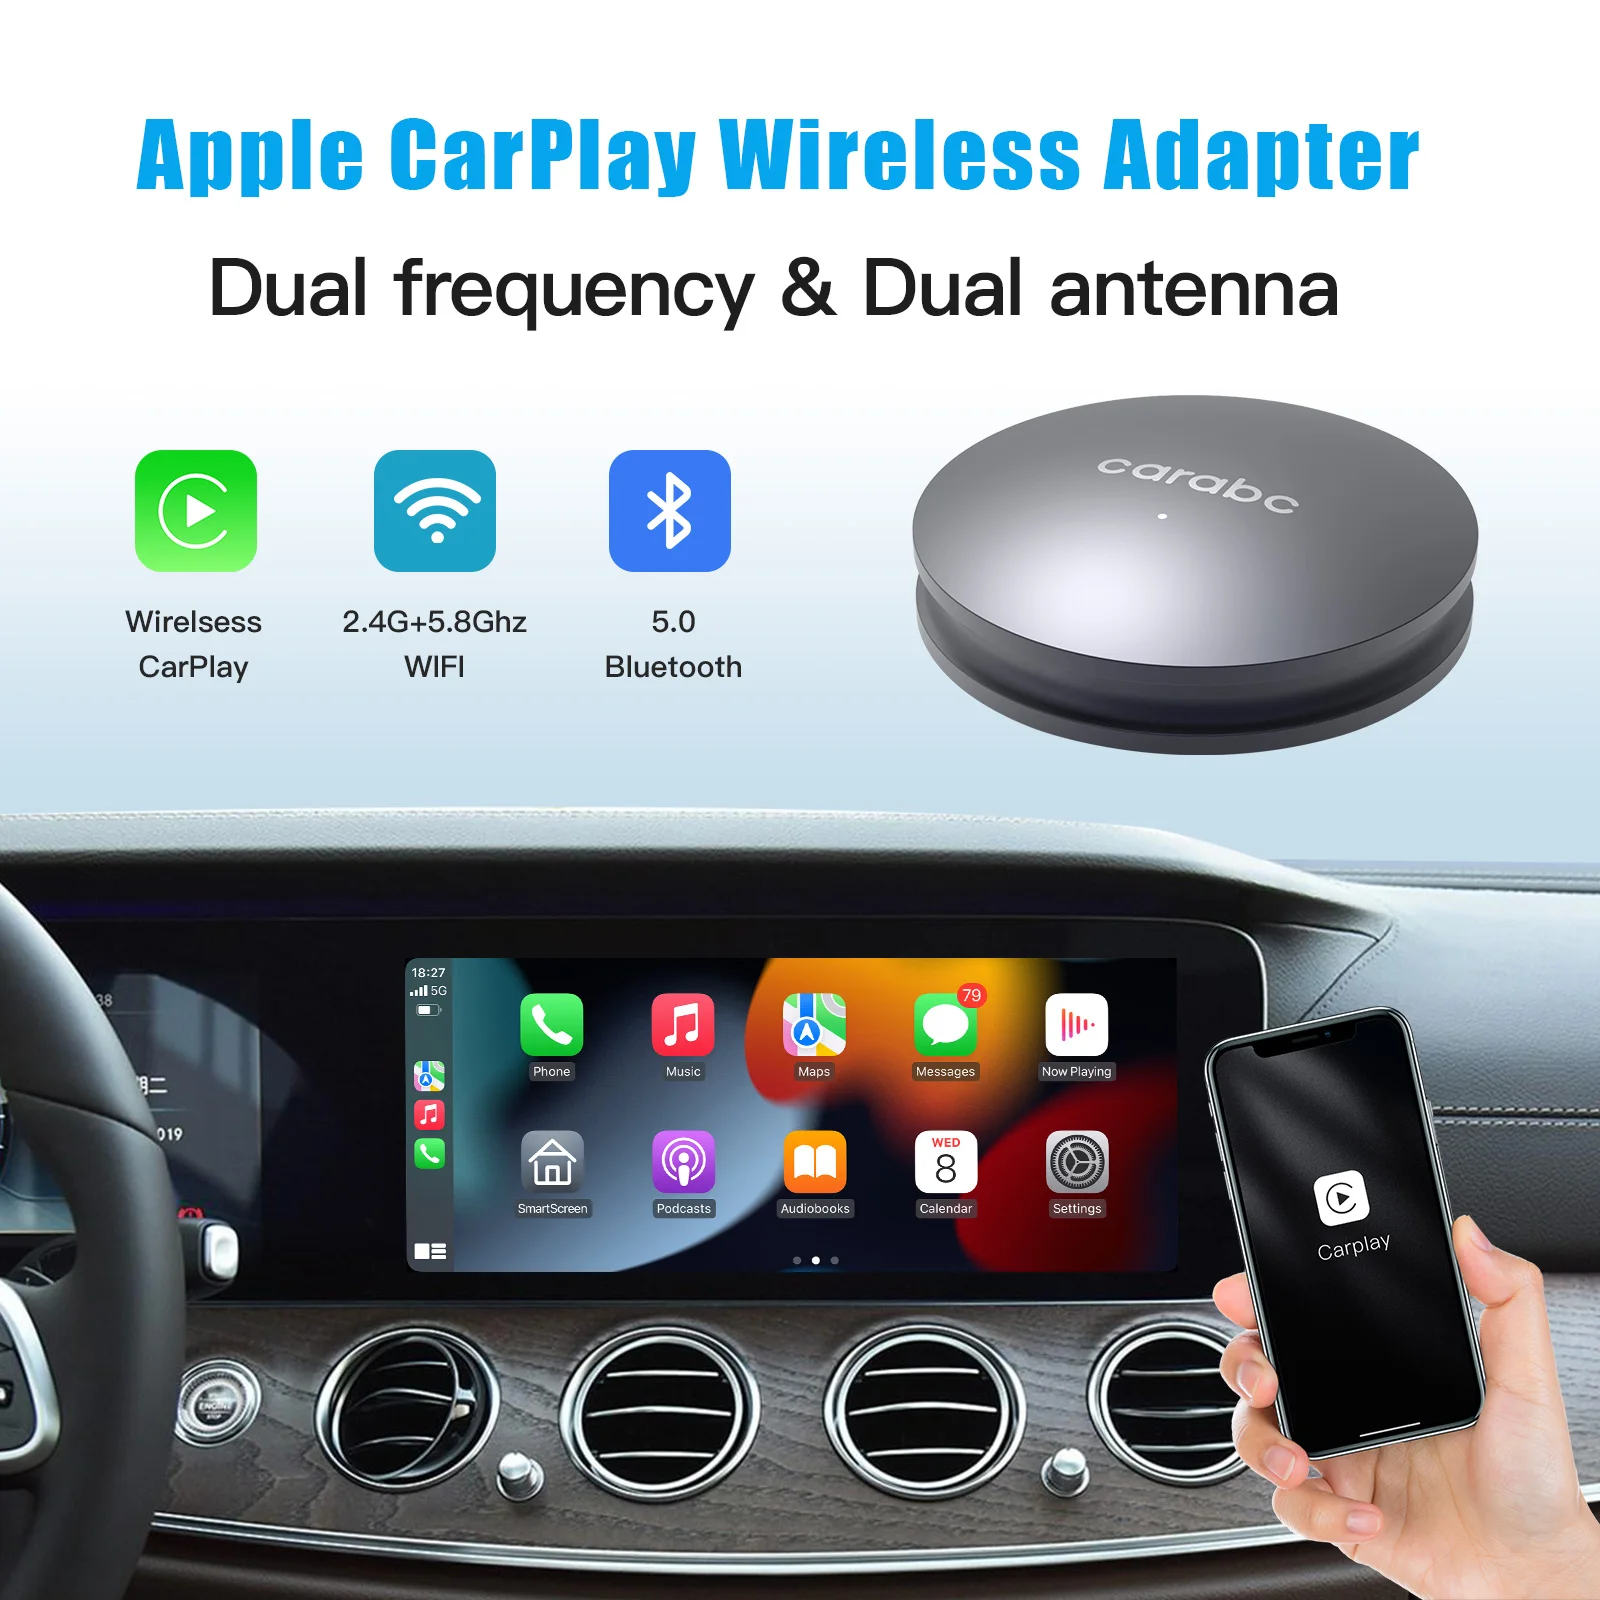 Wireless CarPlay Adapter Wired to Wireless Android Auto Dongle For